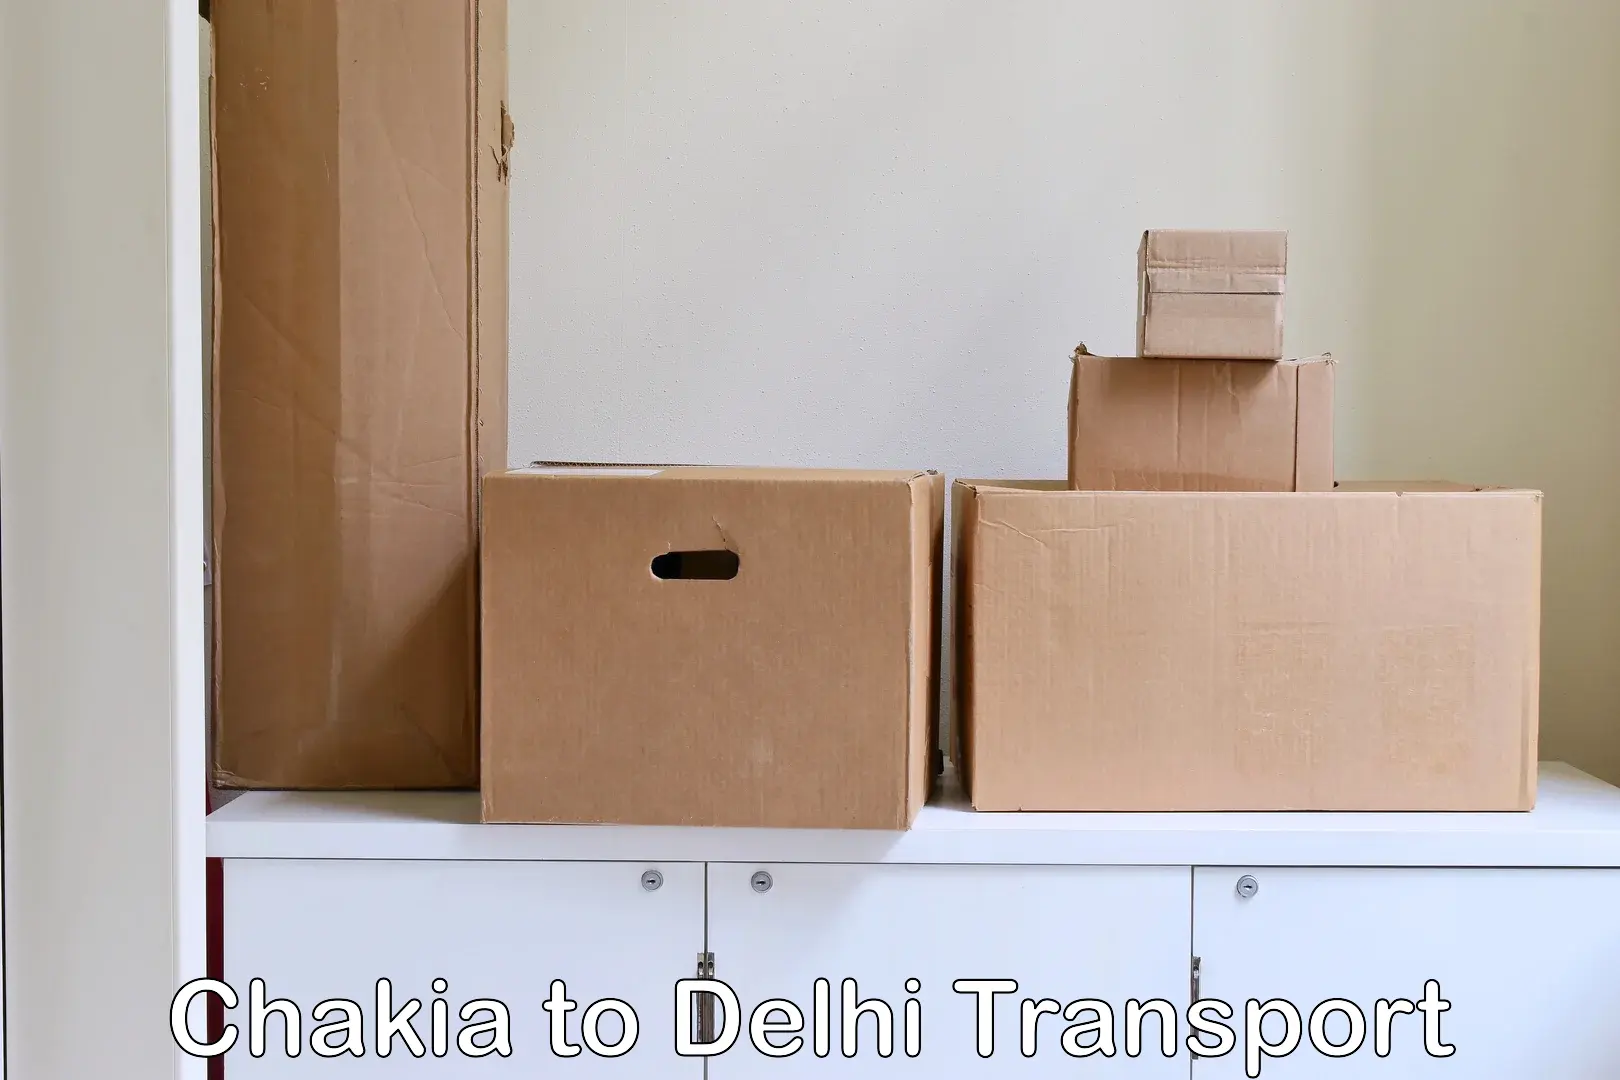 Online transport service Chakia to NCR